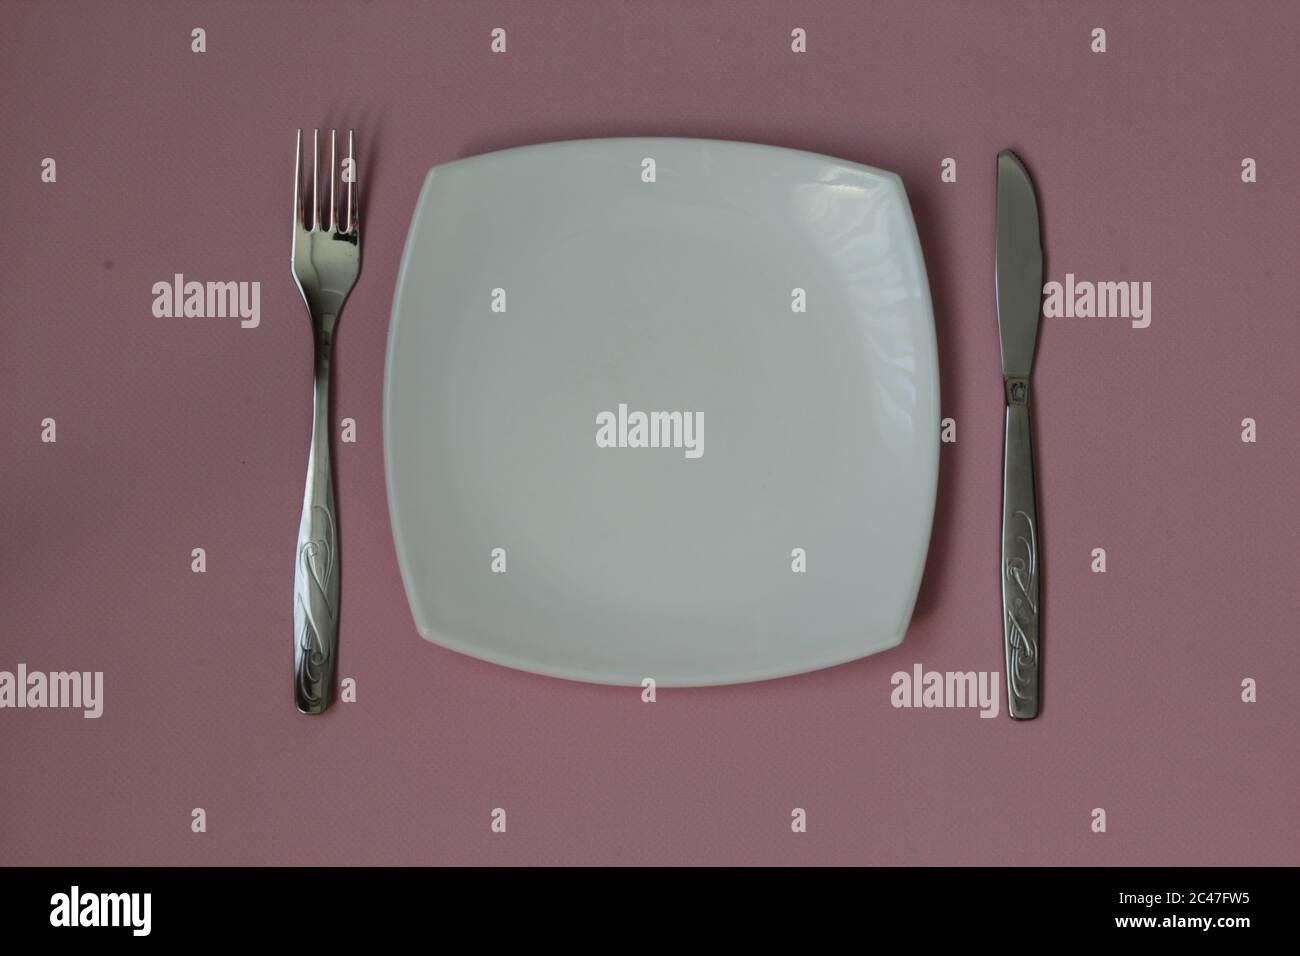 Empty plate, fork and knife over pink background. Clean plate and cutlery on light background. Top view. Flat lay. Stock Photo